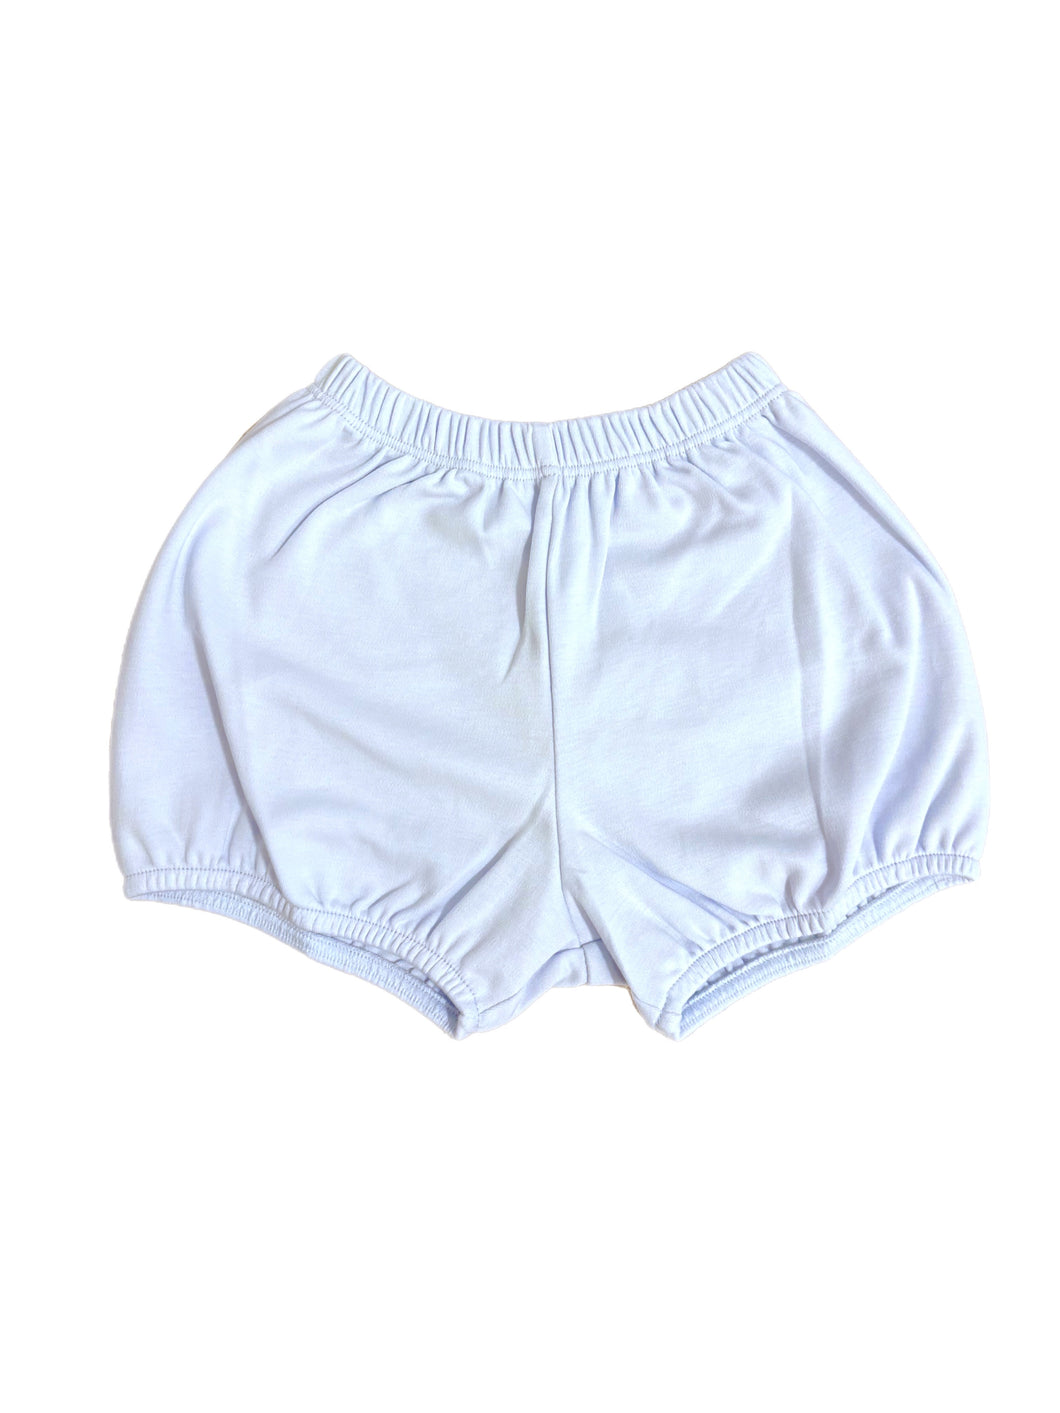 Blue Knit Bloomers